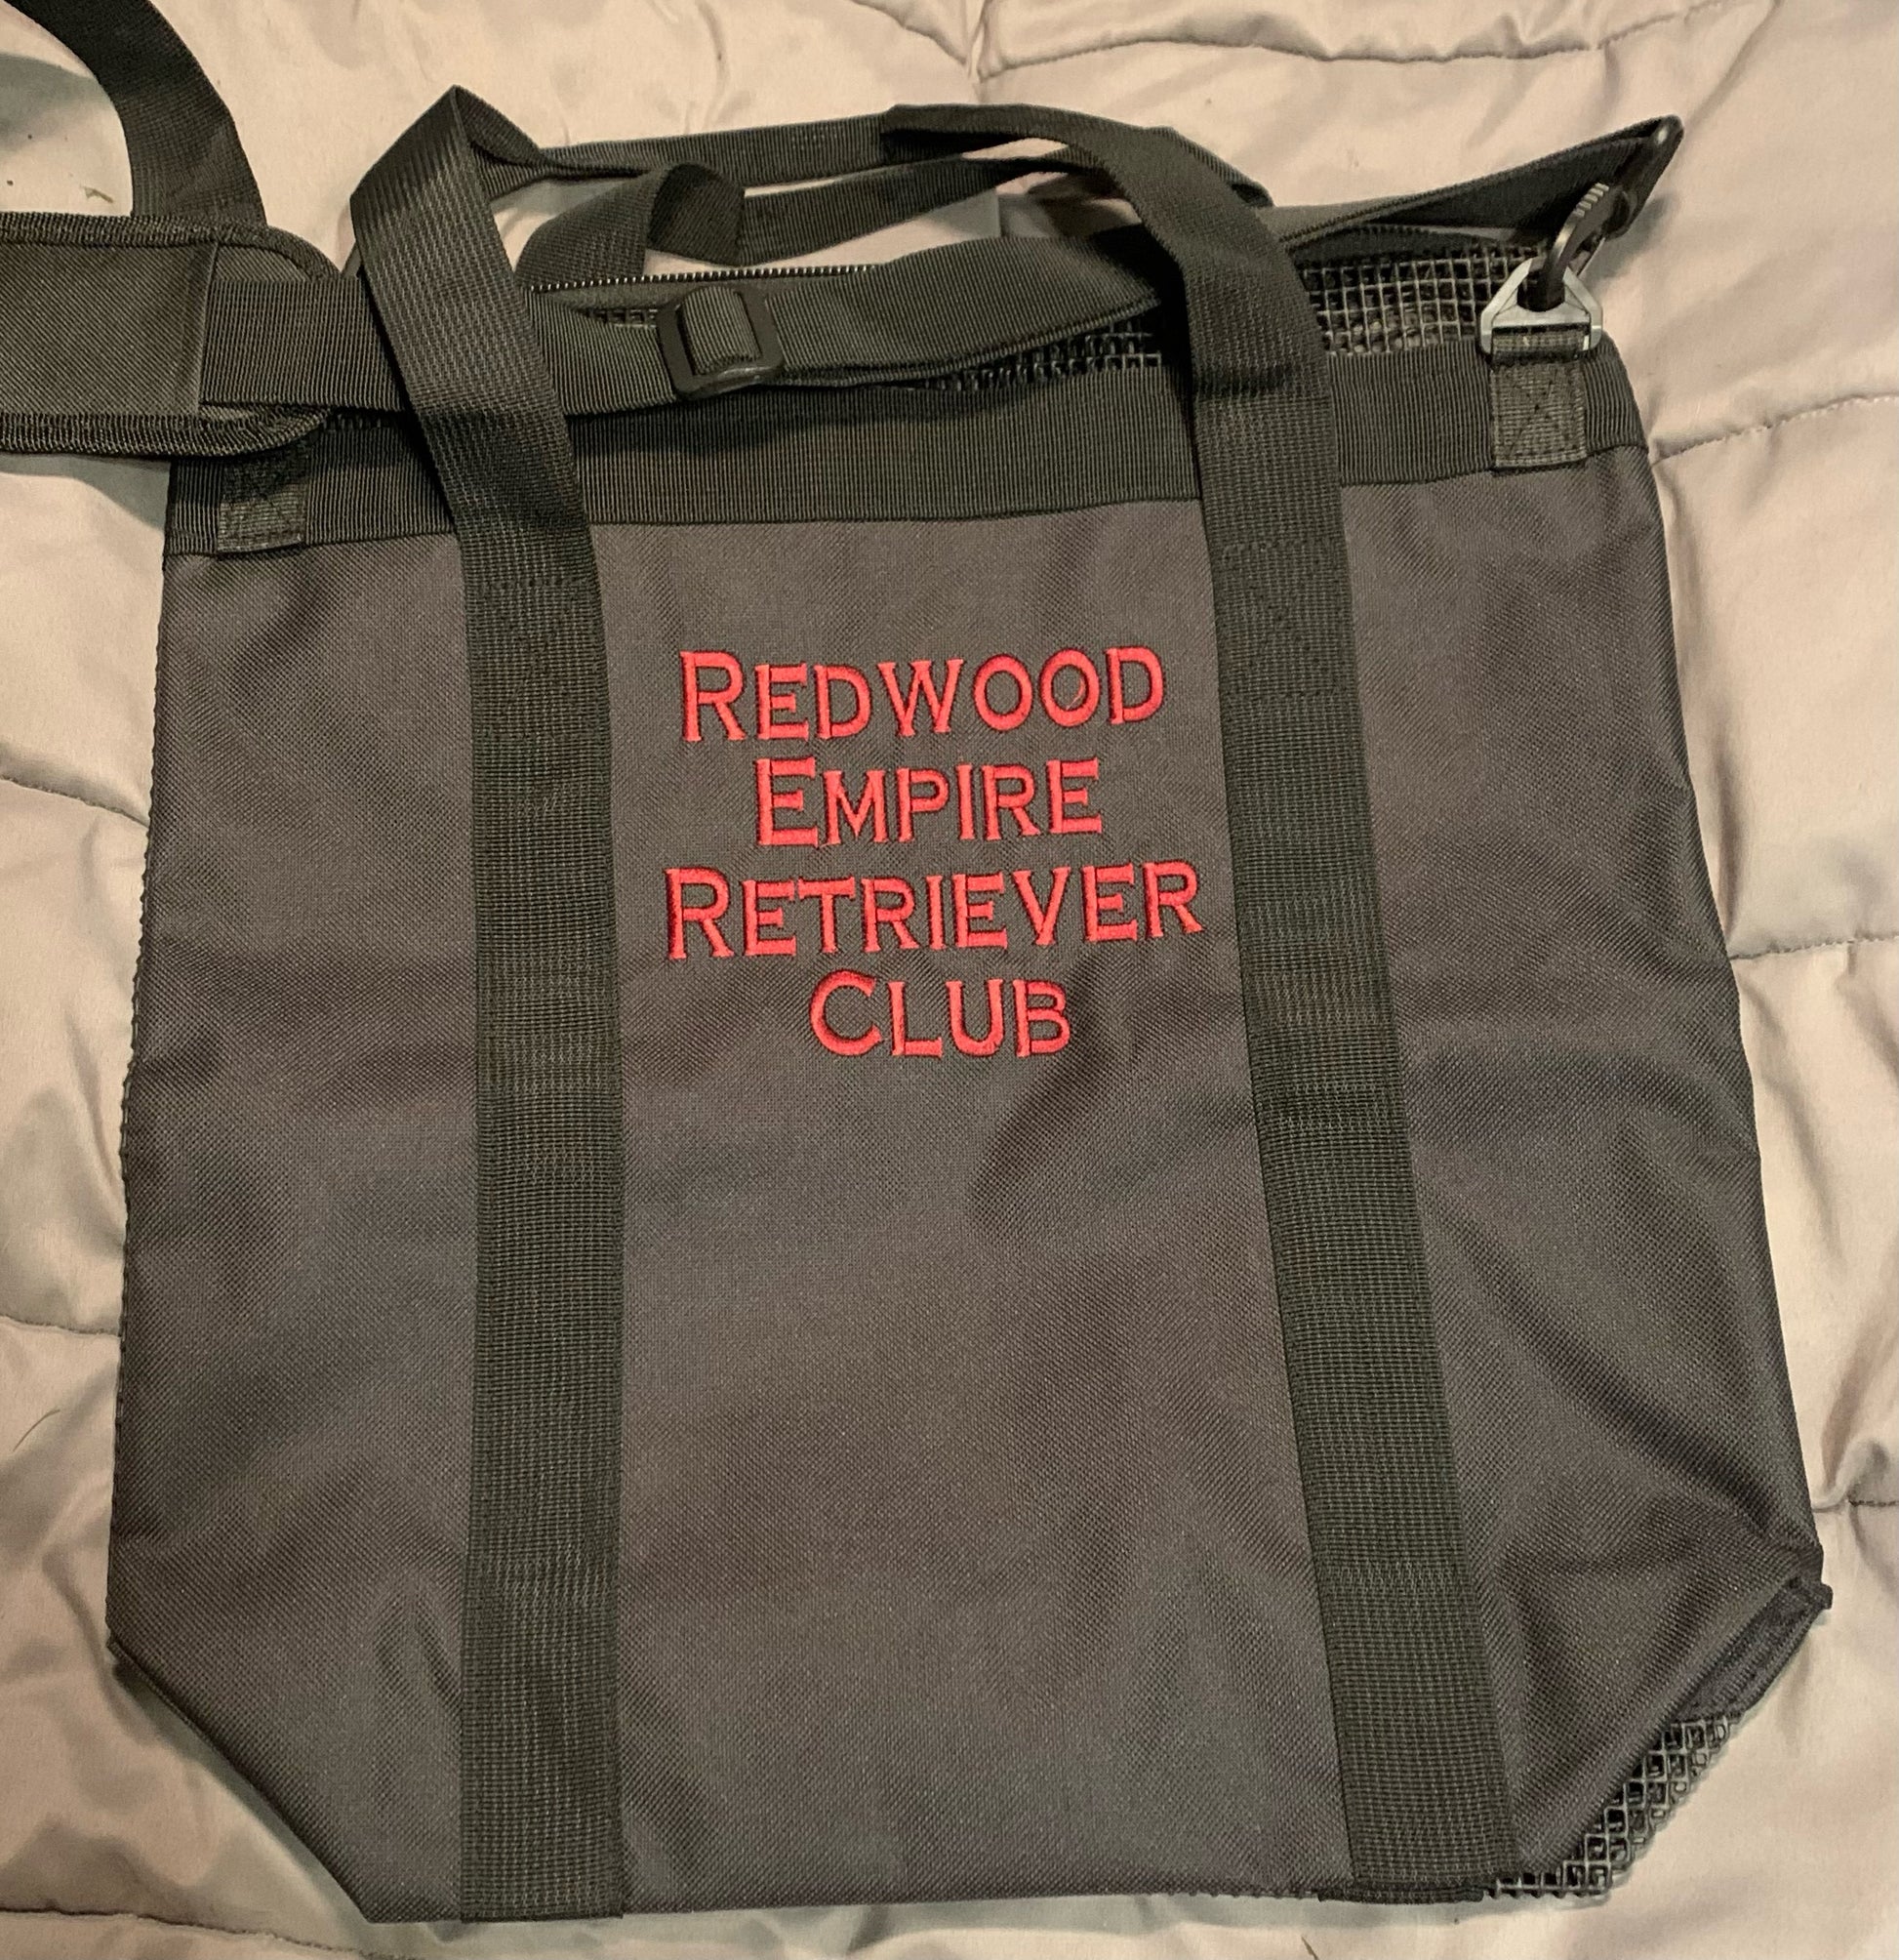 Retrieverworx Embroidered bird bags for retriever training make great judges gifts and awards!